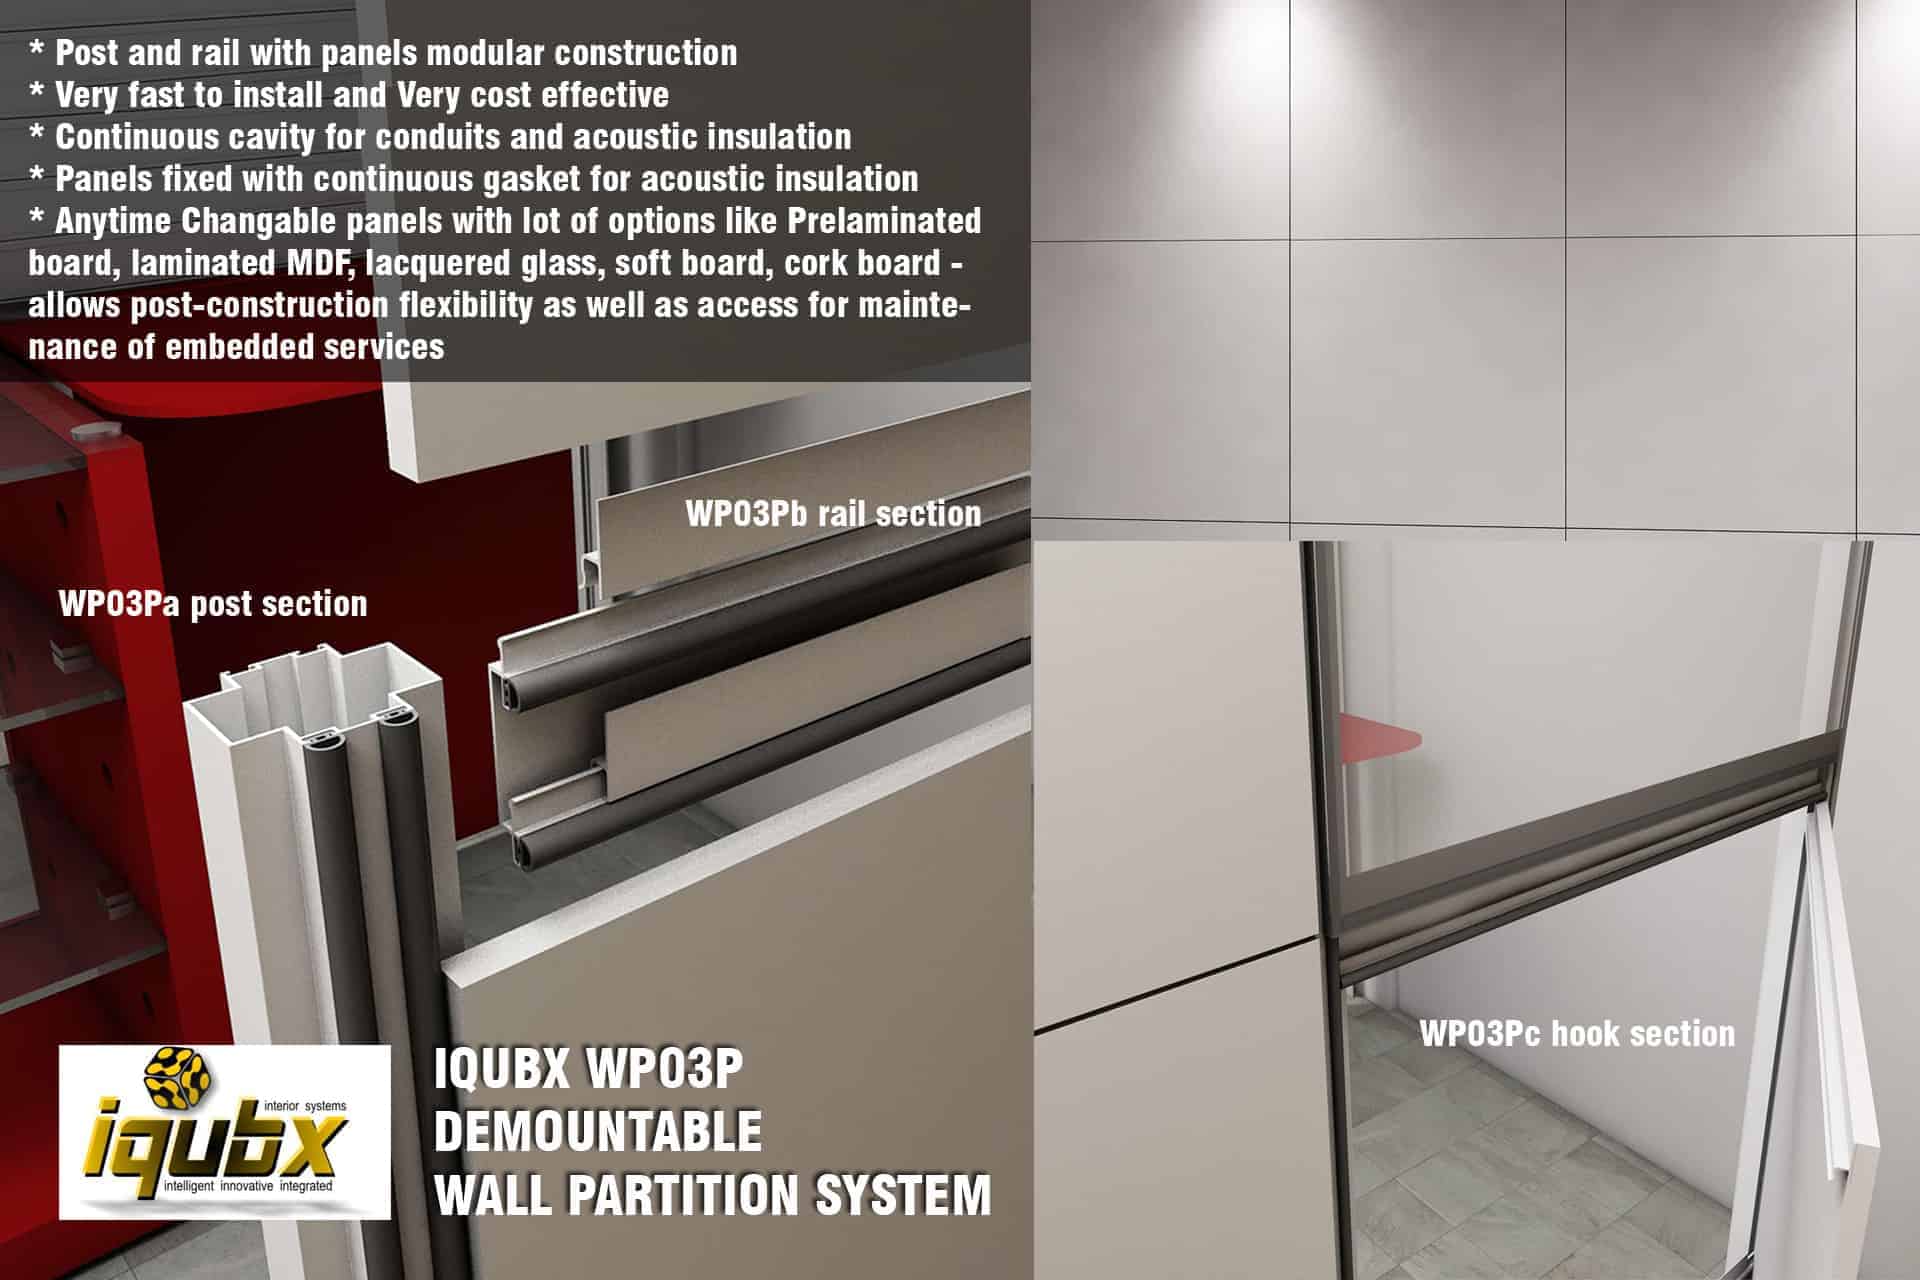 IQUBX WP03P demountable wall partition system